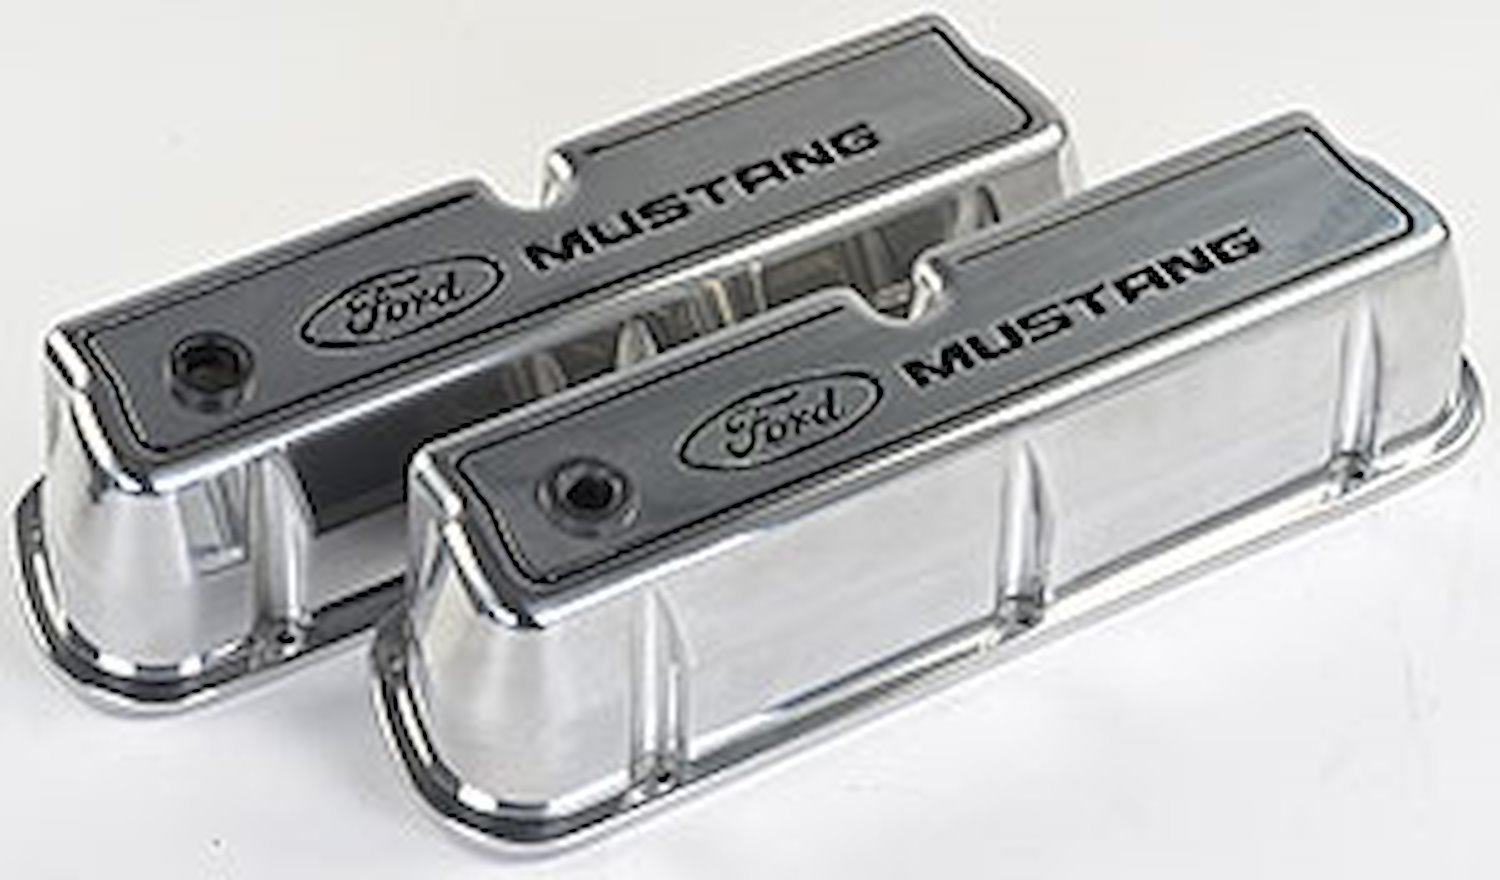 Die-Cast Aluminum Tall Valve Covers for Small Block Ford 289-302-351W in Polished Finish with Ford Mustang Emblem